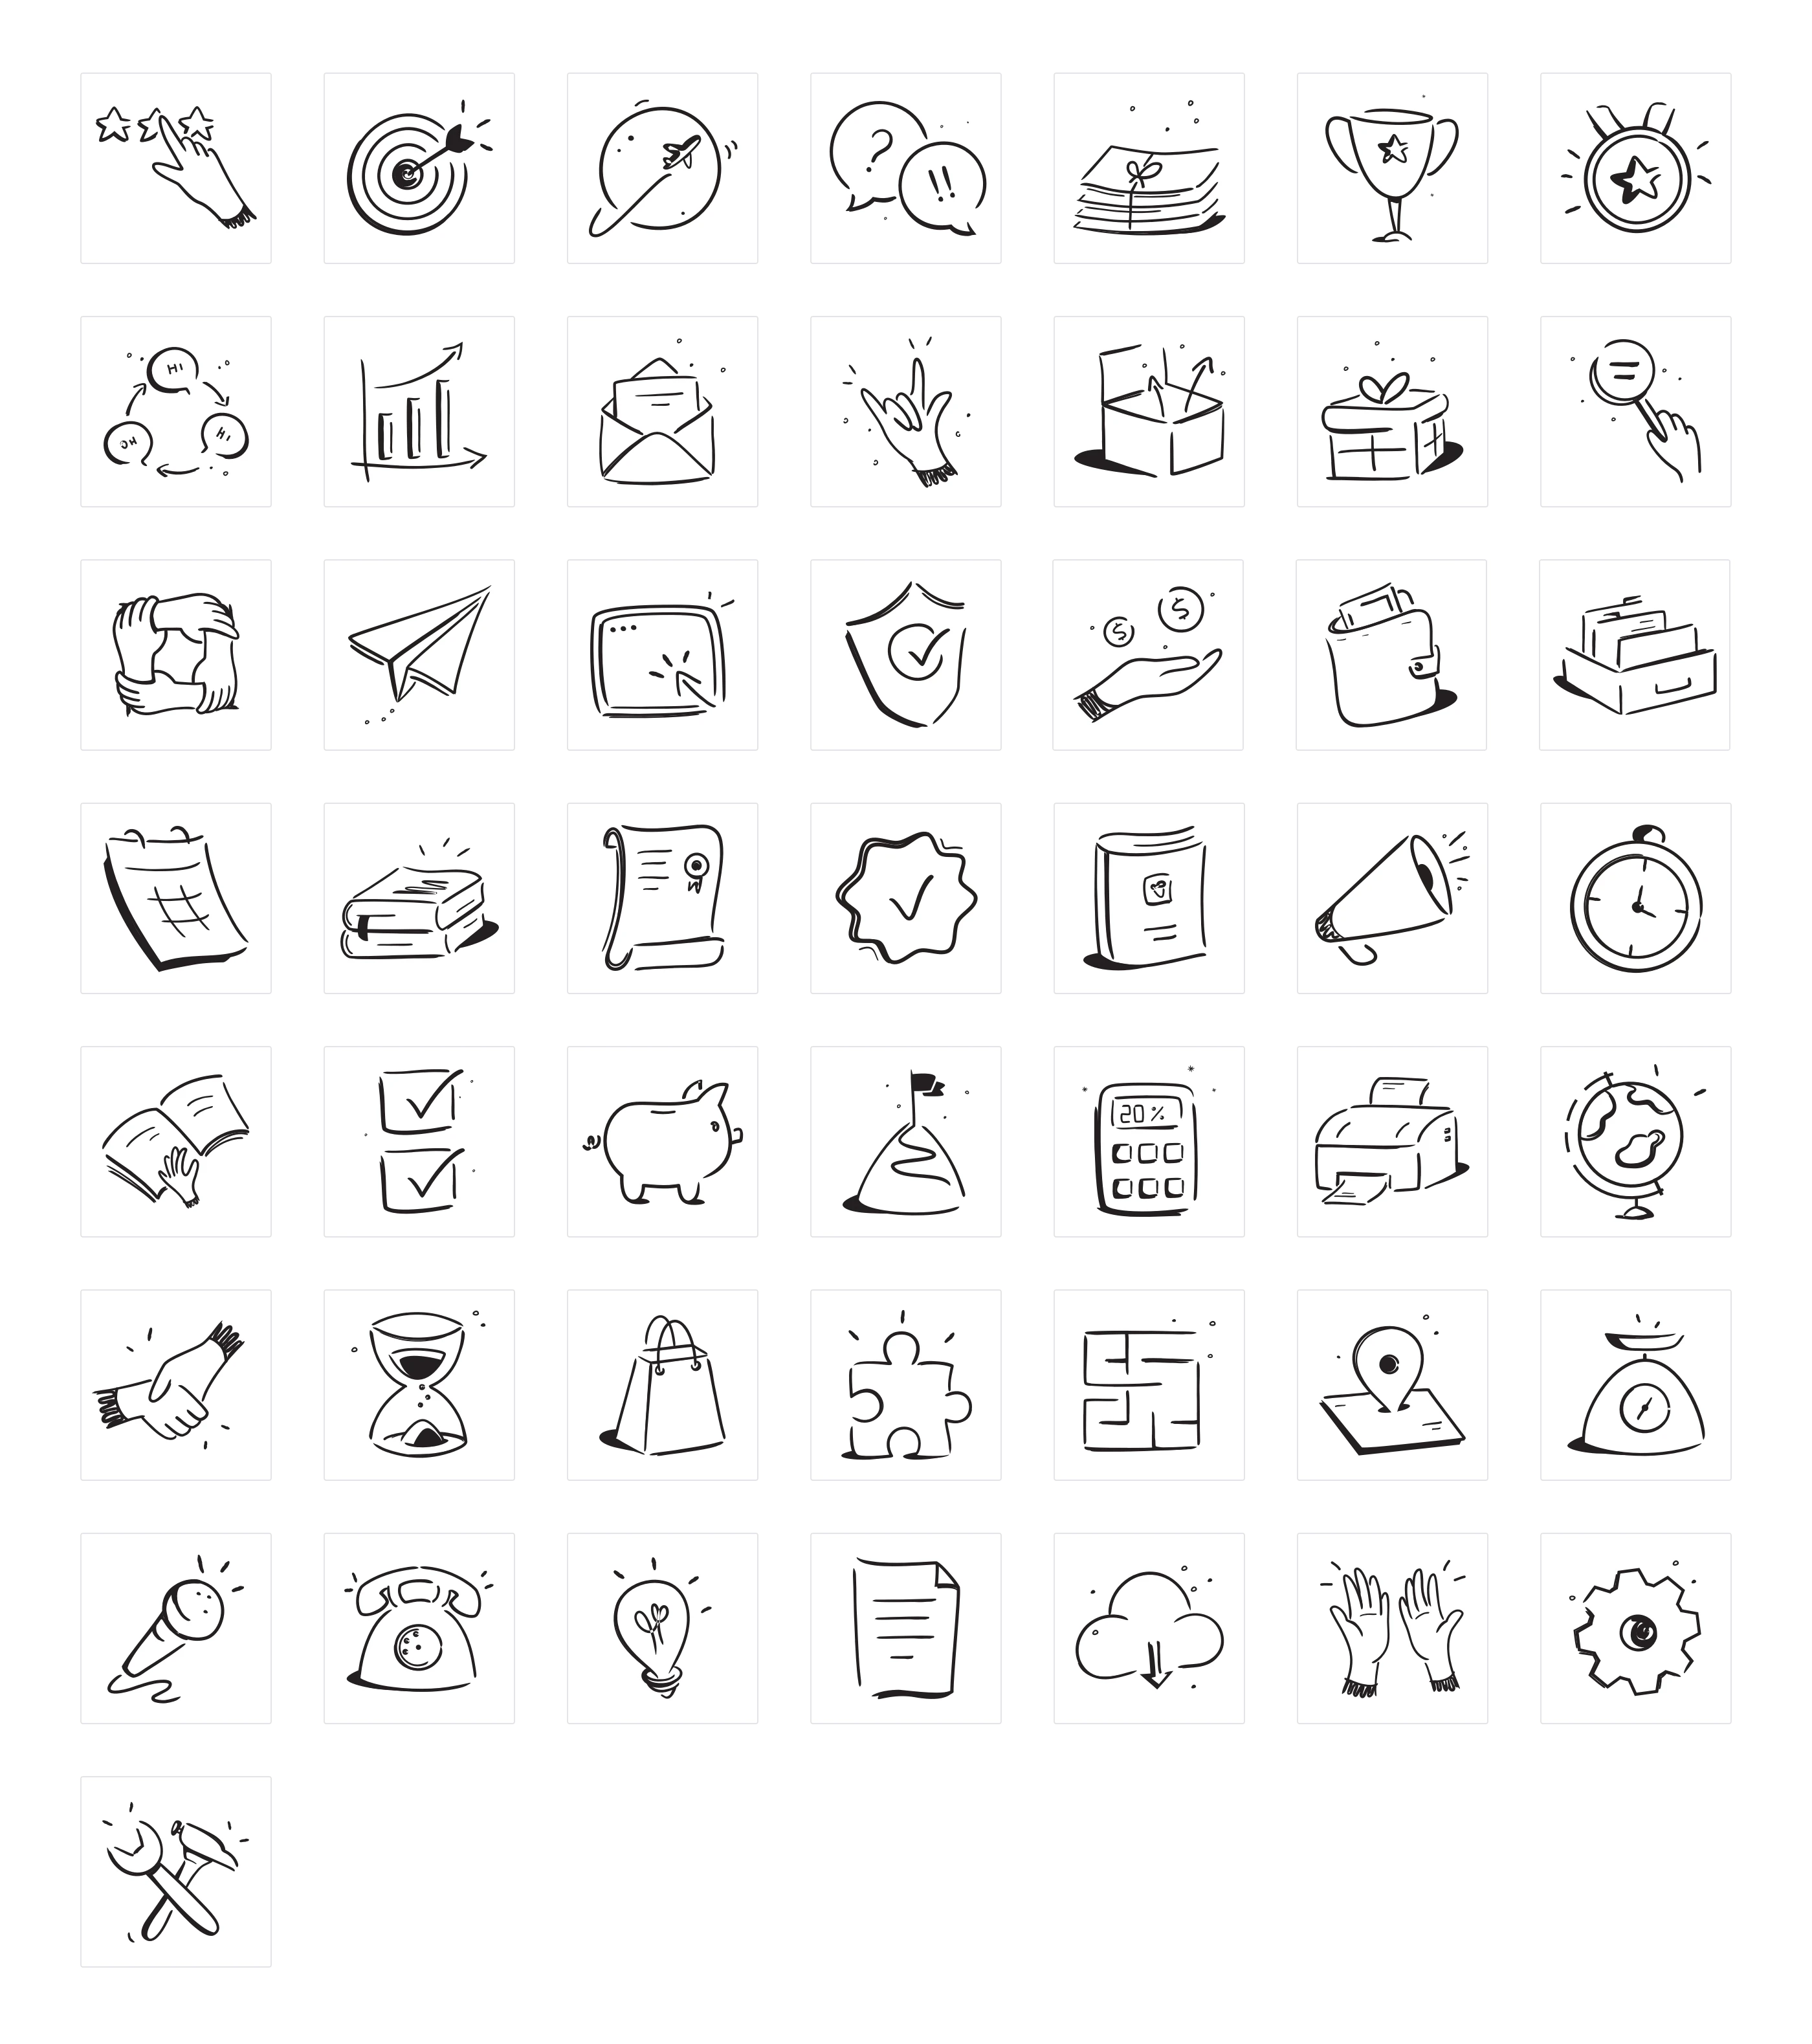 Free Notion Style Icons - A beautiful pack of 50 free Notion-style icons that you can use in your websites, apps and Notion templates.